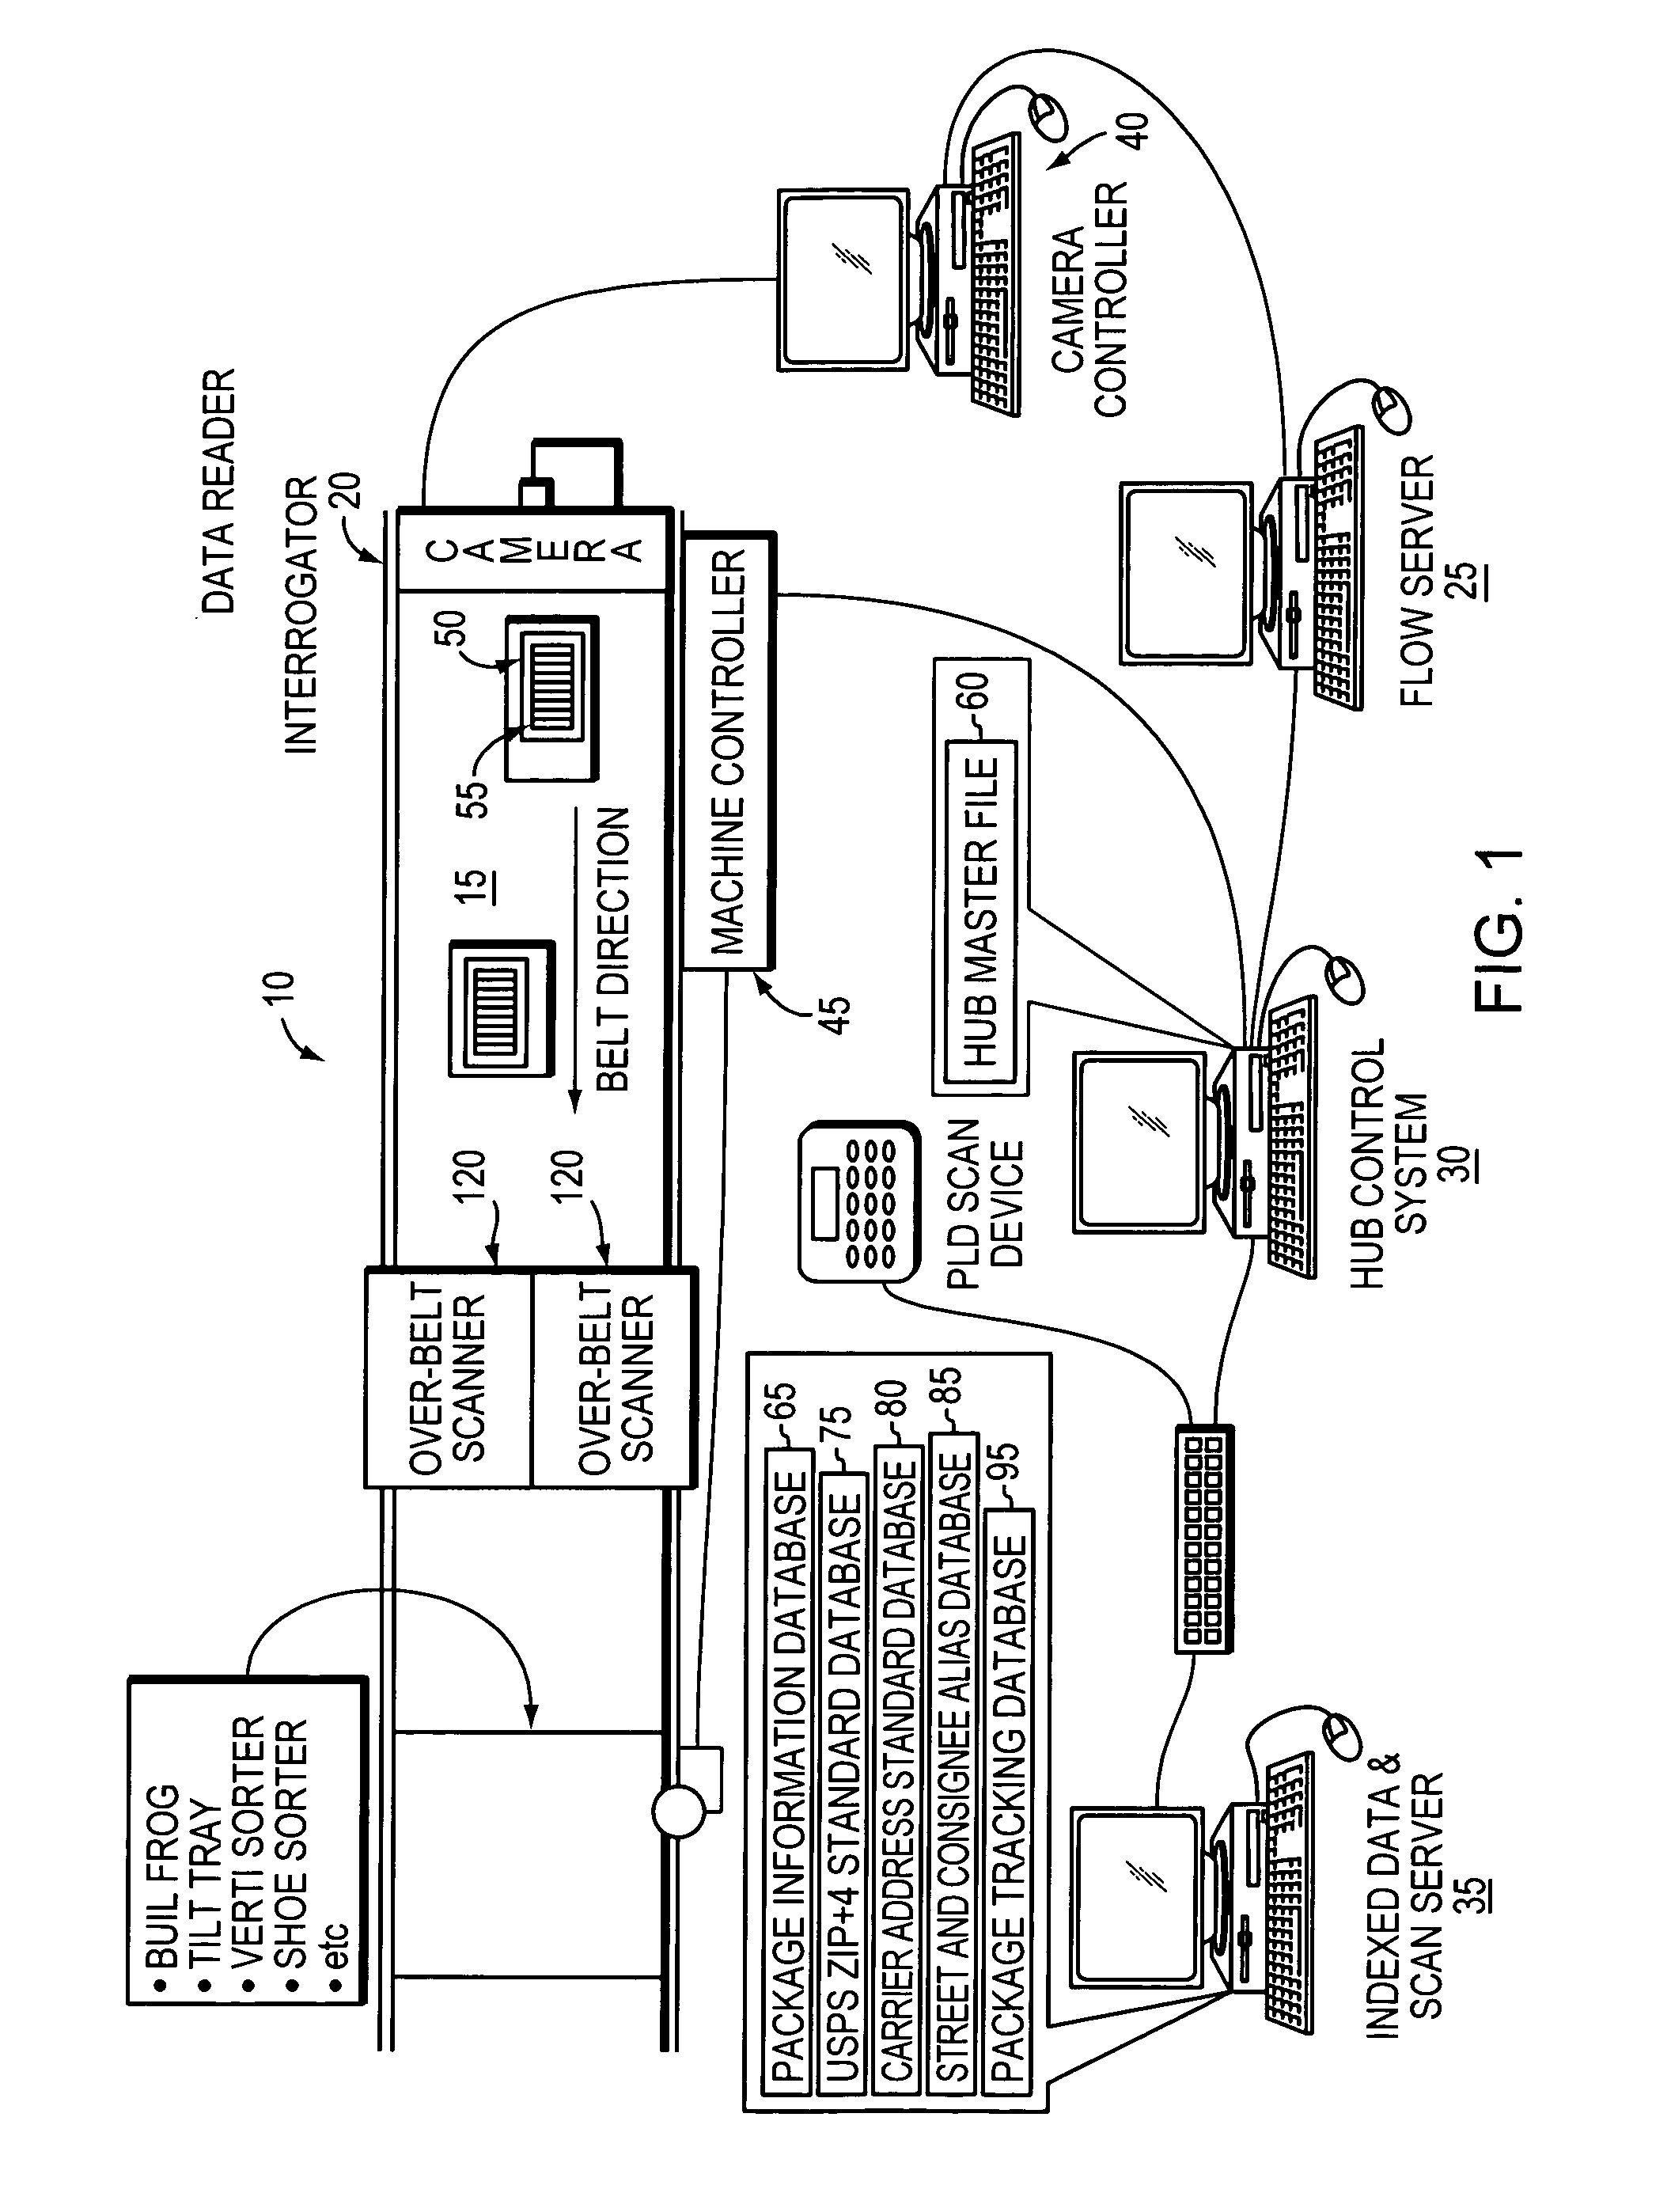 Systems and methods for package sortation and delivery using radio frequency identification technology